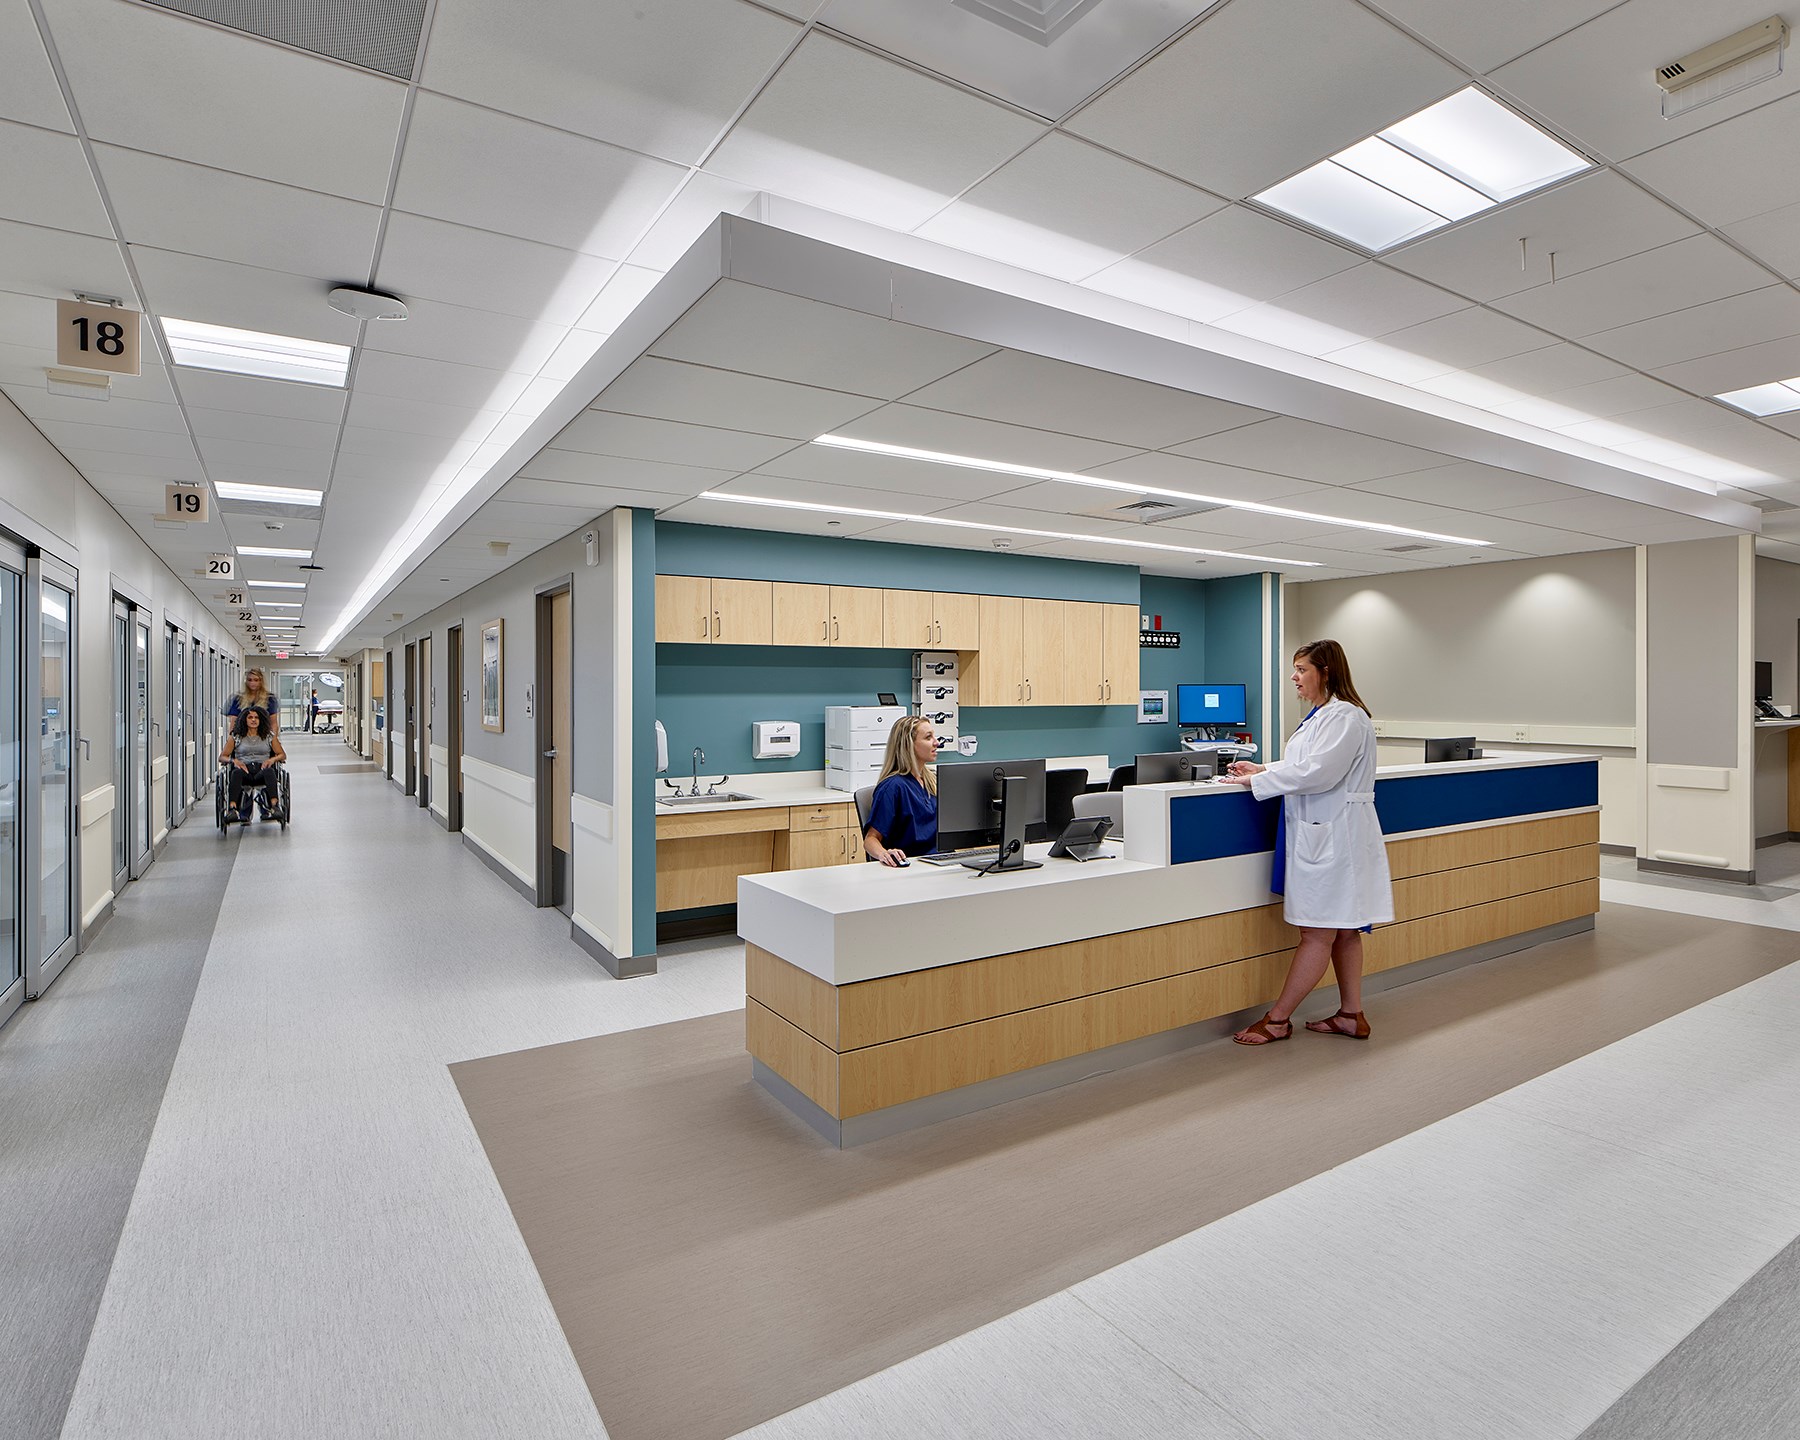 A hospital lobby featured on the Healthcare Facilities Symposium and Expo website.